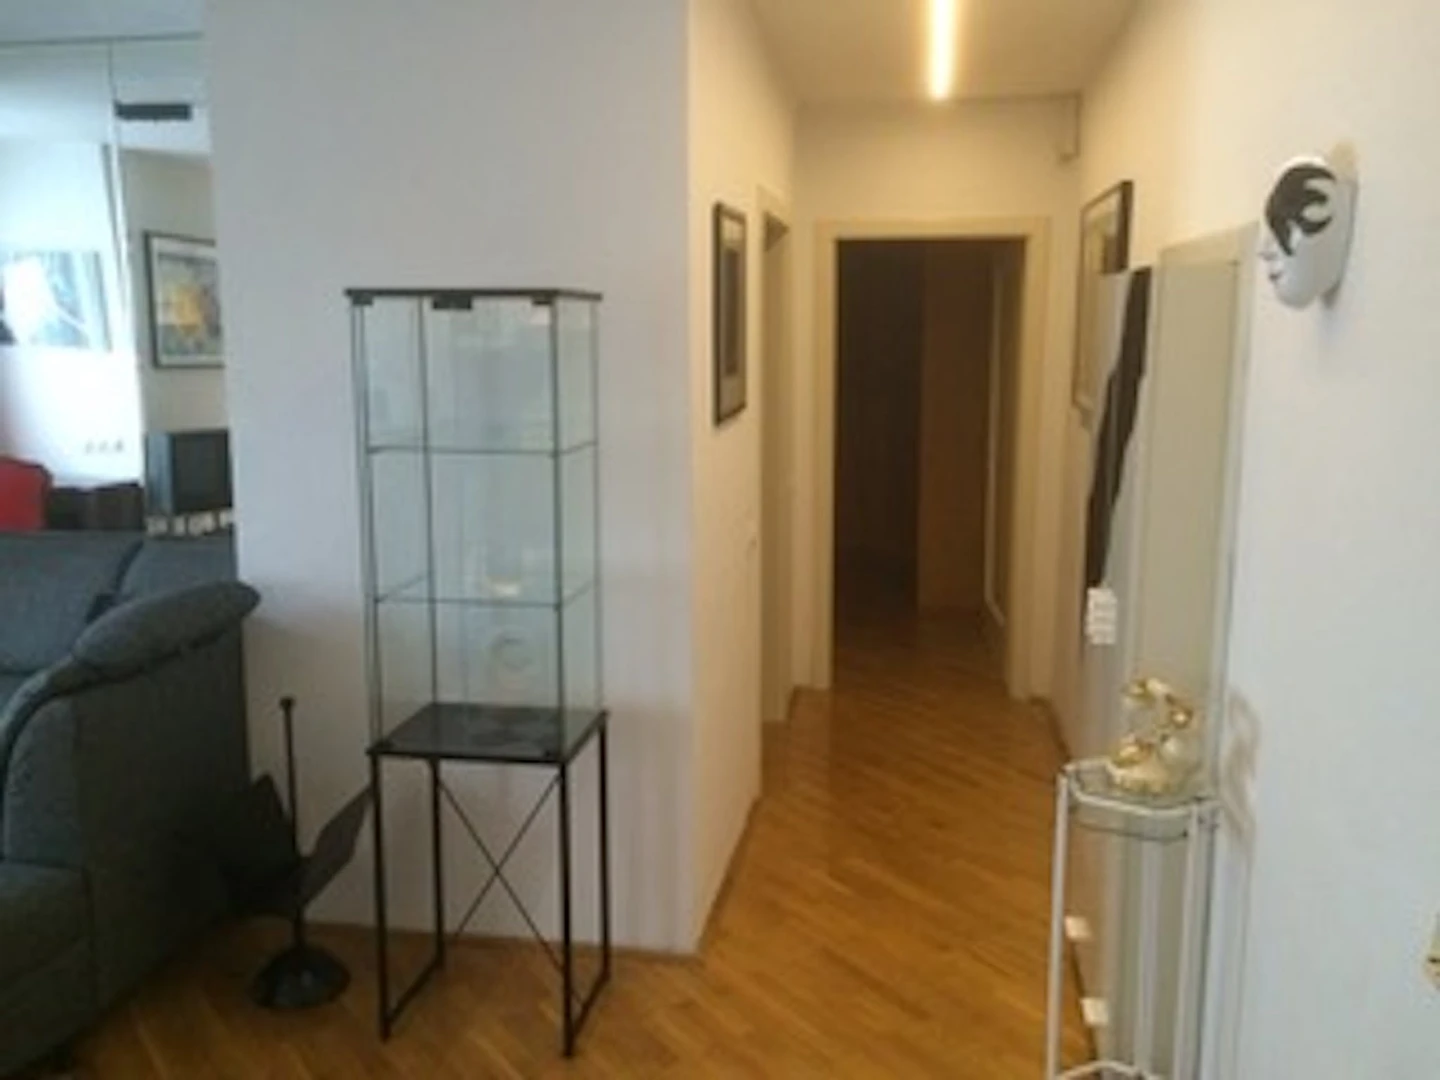 Room for rent in a shared flat in Ljubljana